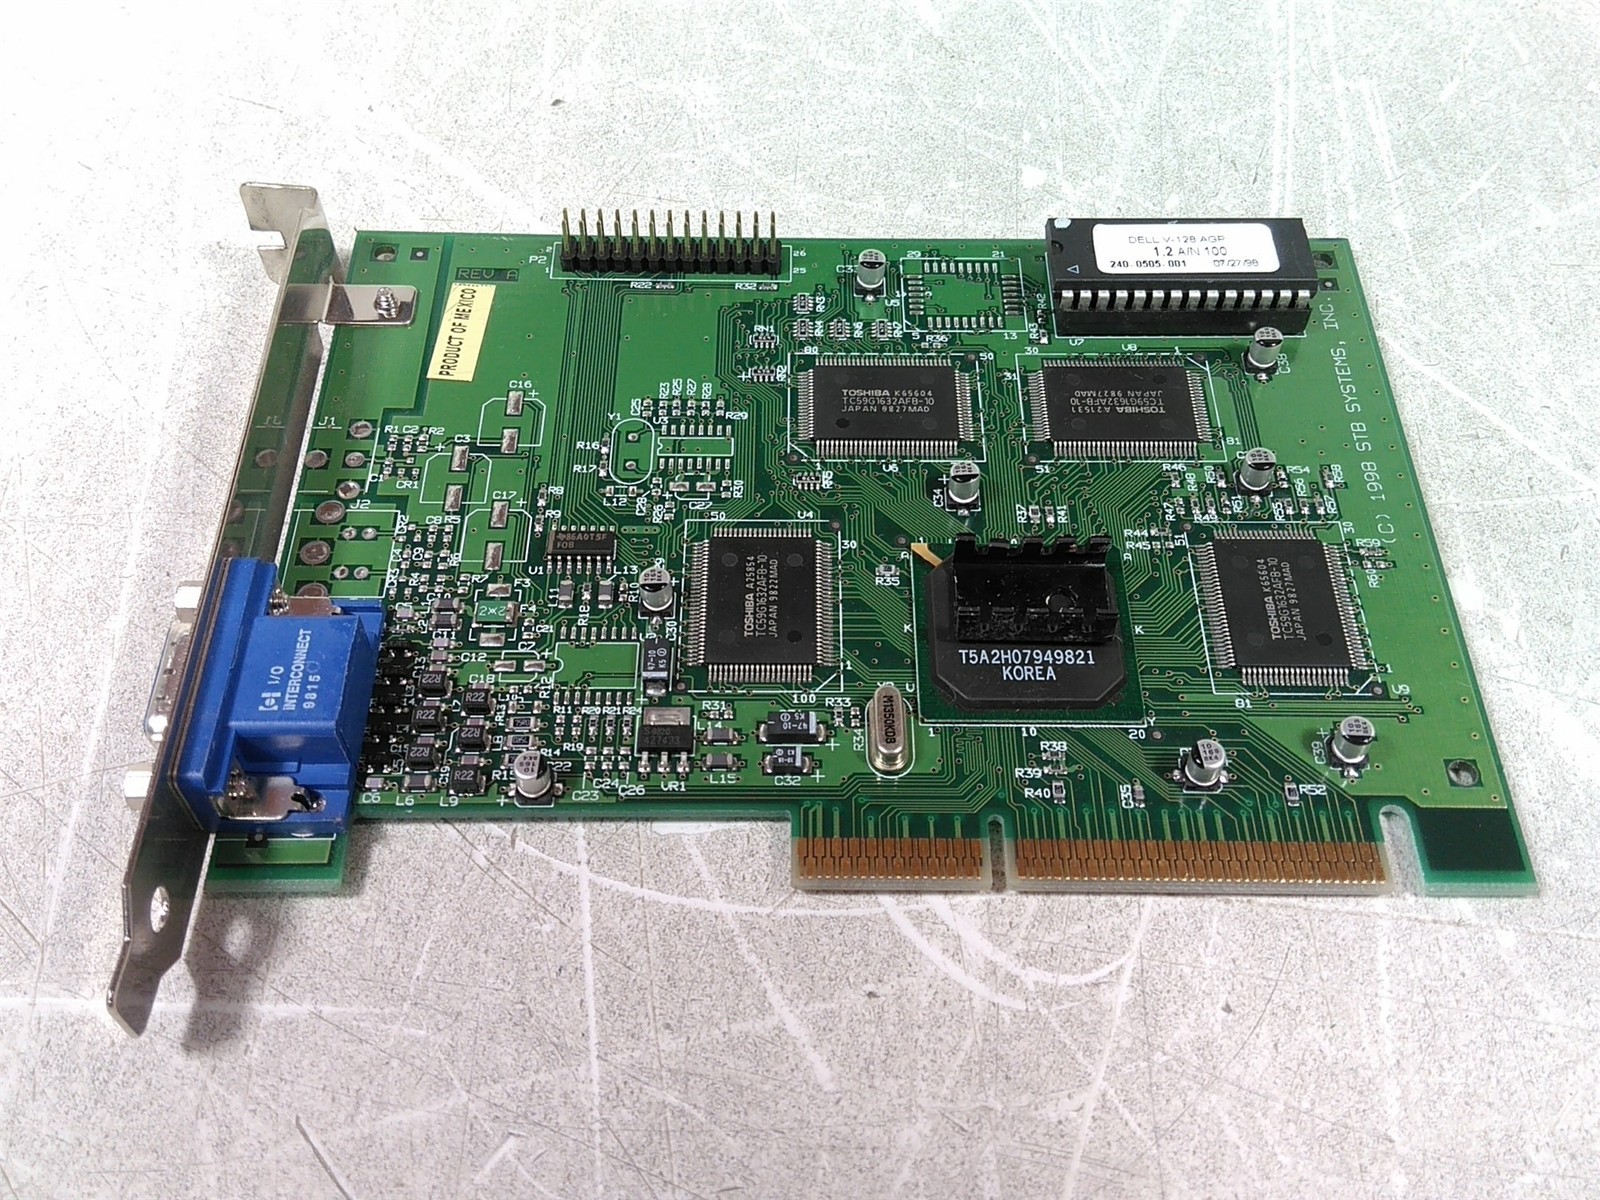 Primary image for Dell STB 1X0-0658-507 0005859C 5859C AGP VGA Video Card